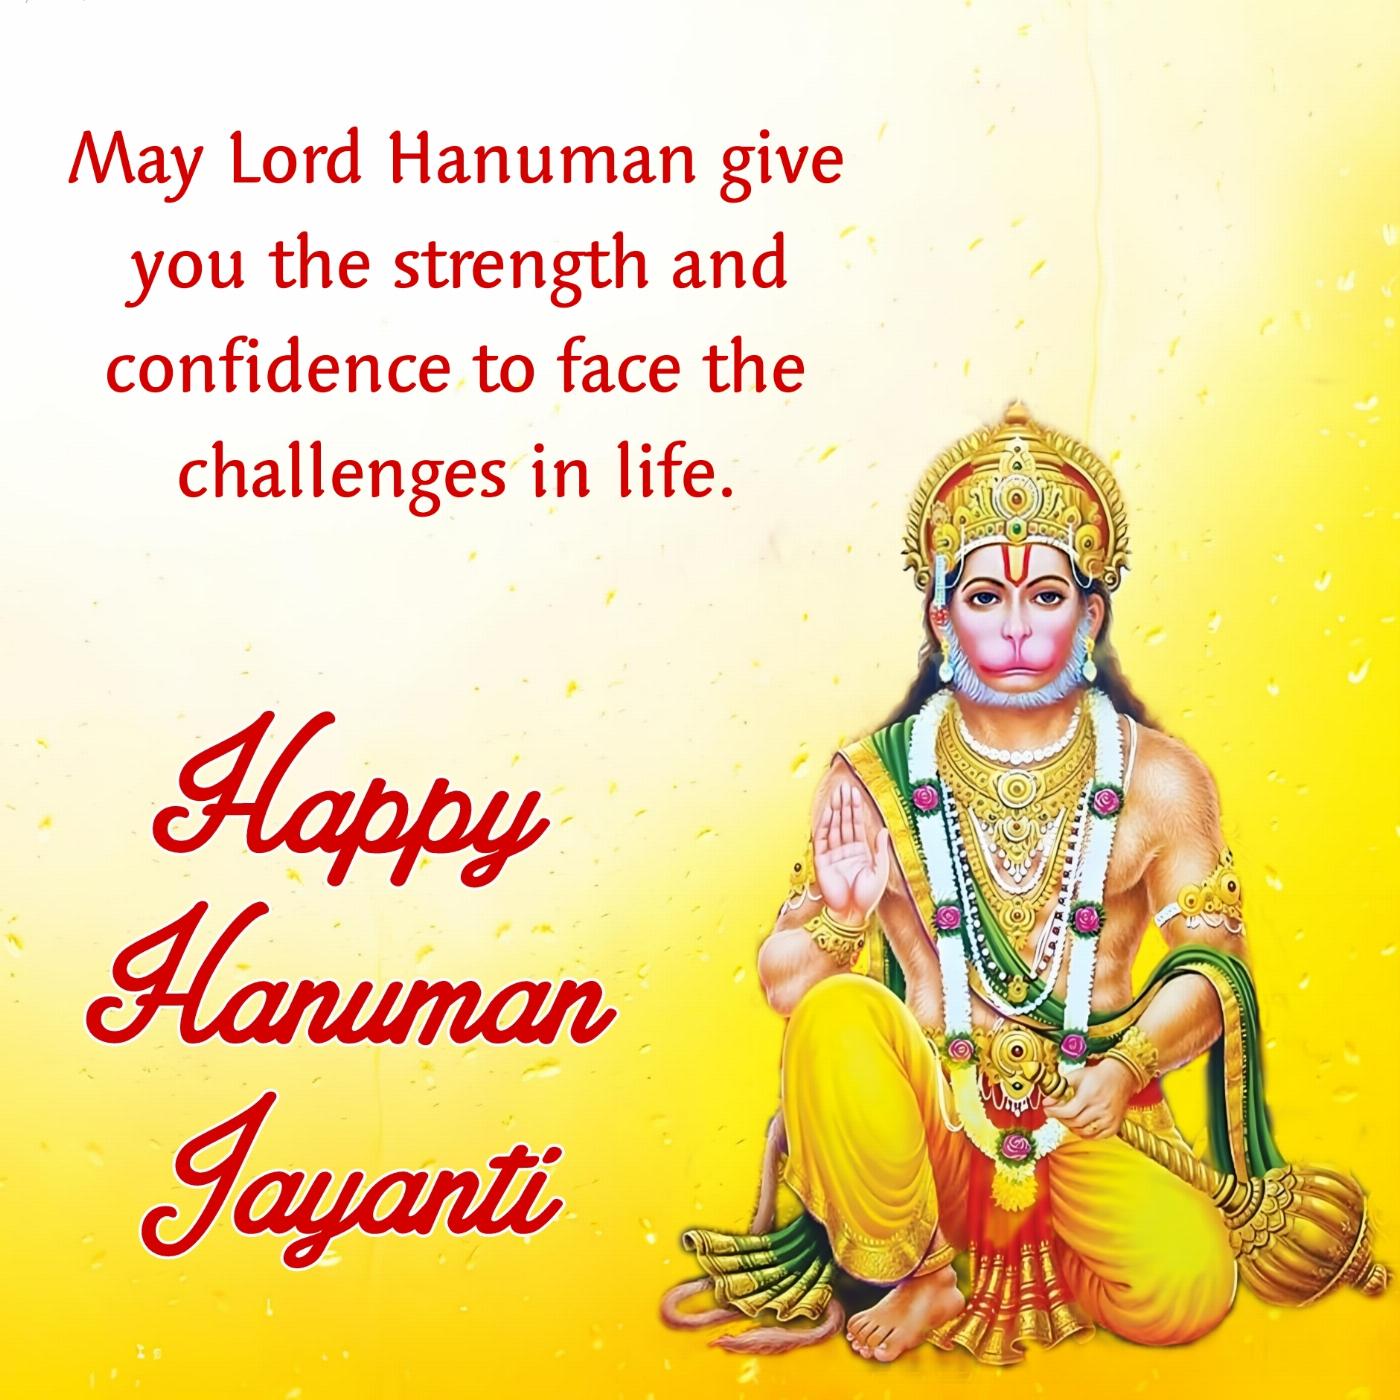 May Lord Hanuman give you the strength and confidence